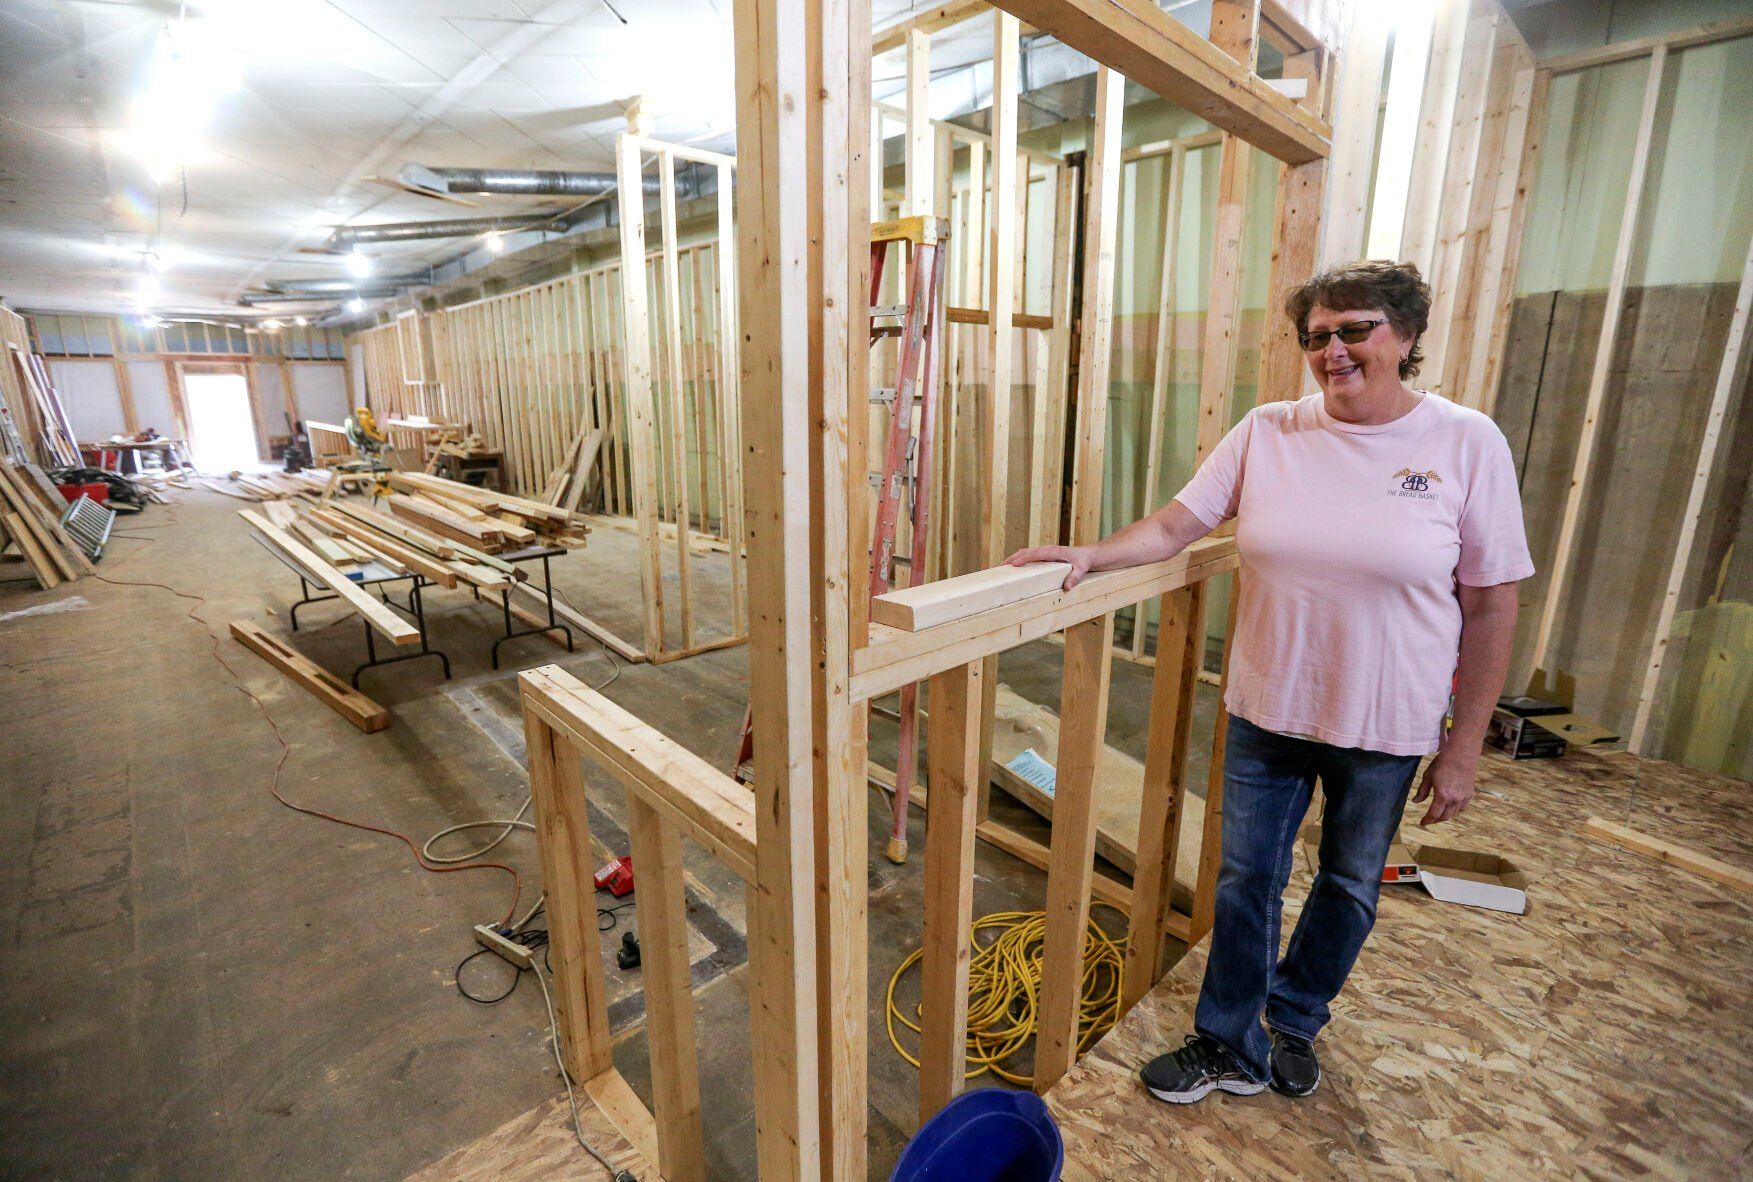 Owner Jackie Mormann stands in what will be the kitchen area of The Bread Basket located in Manchester, Iowa, on Friday, Oct. 28, 2022.    PHOTO CREDIT: Dave Kettering